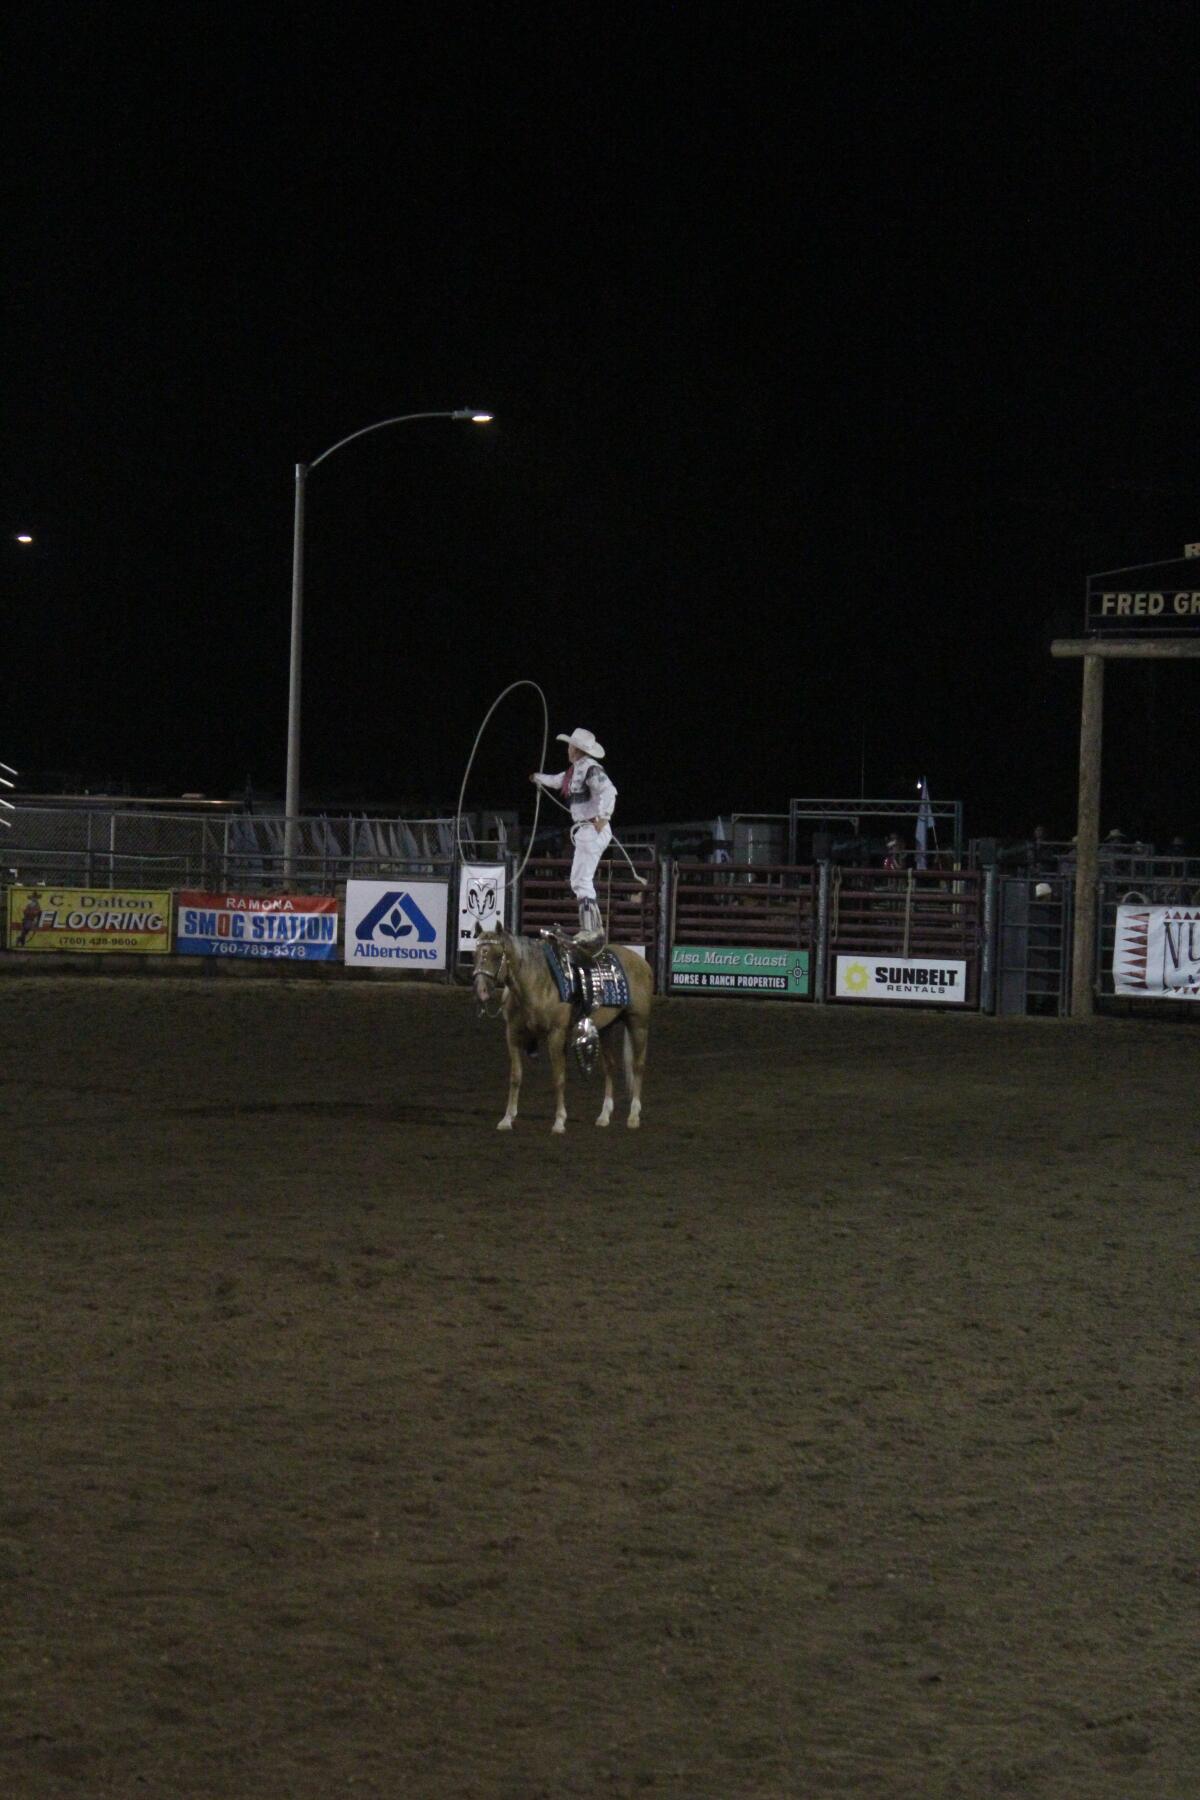 Rider Kiesner preparing to jump through the spinning rope while standing on his horse.